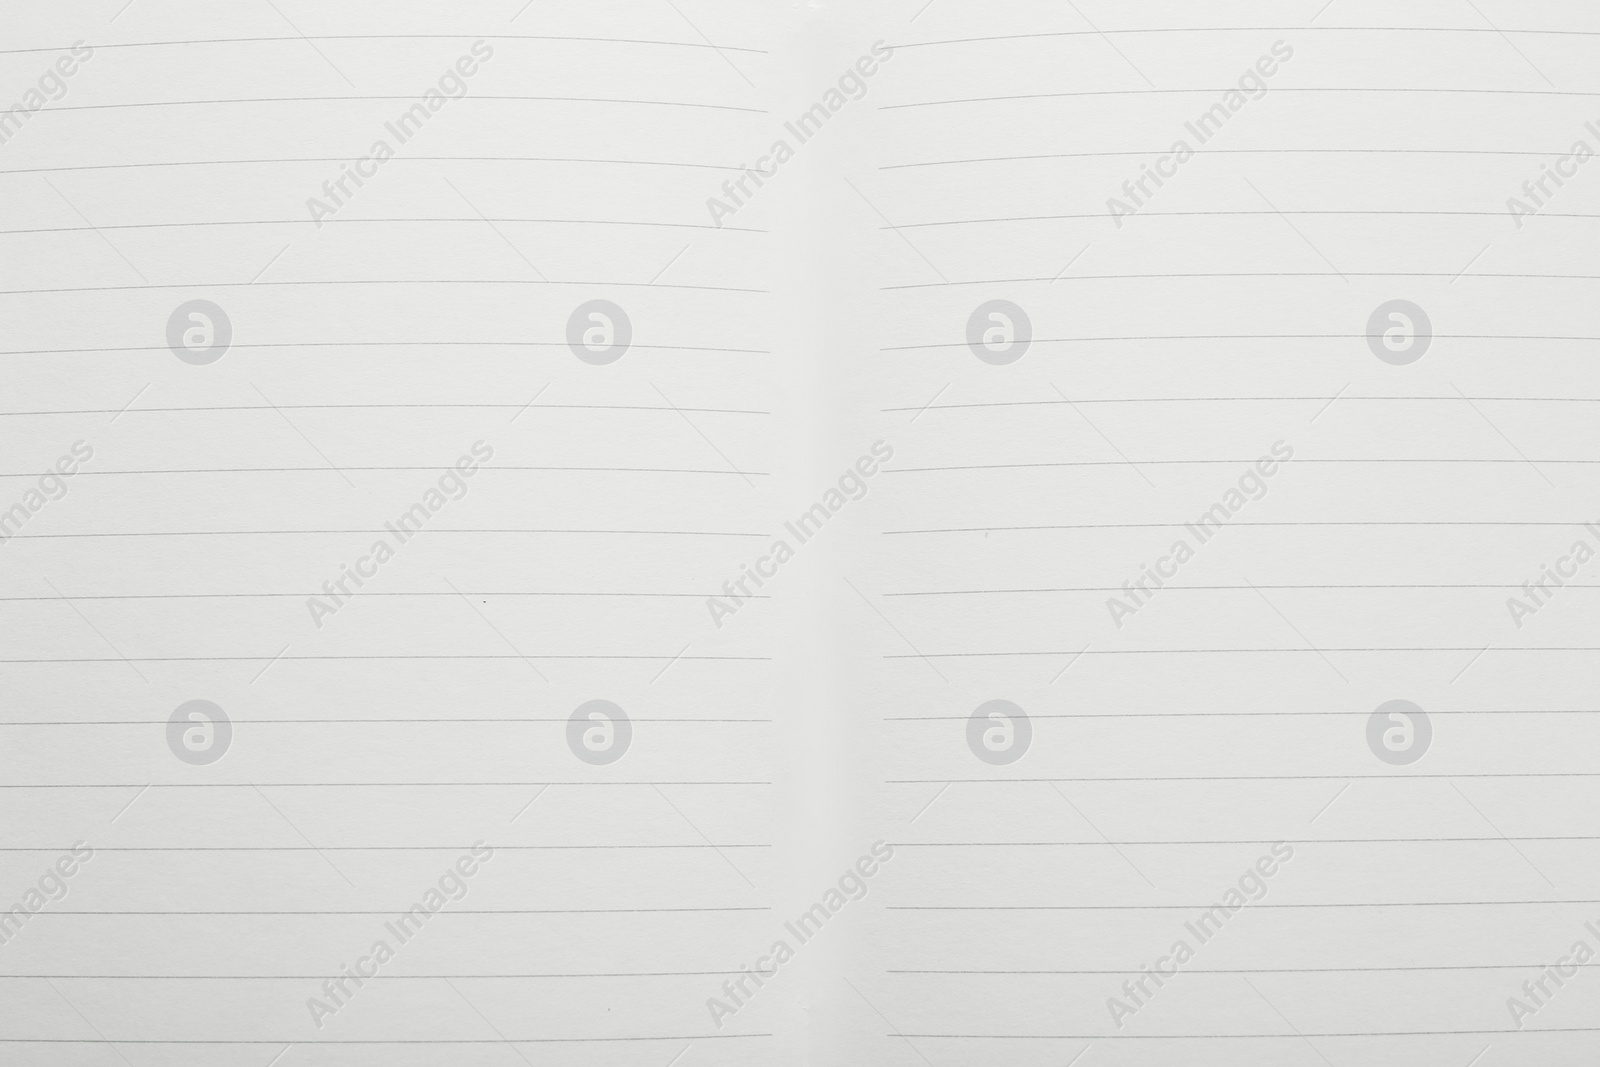 Photo of Lined notebook sheets as background, top view